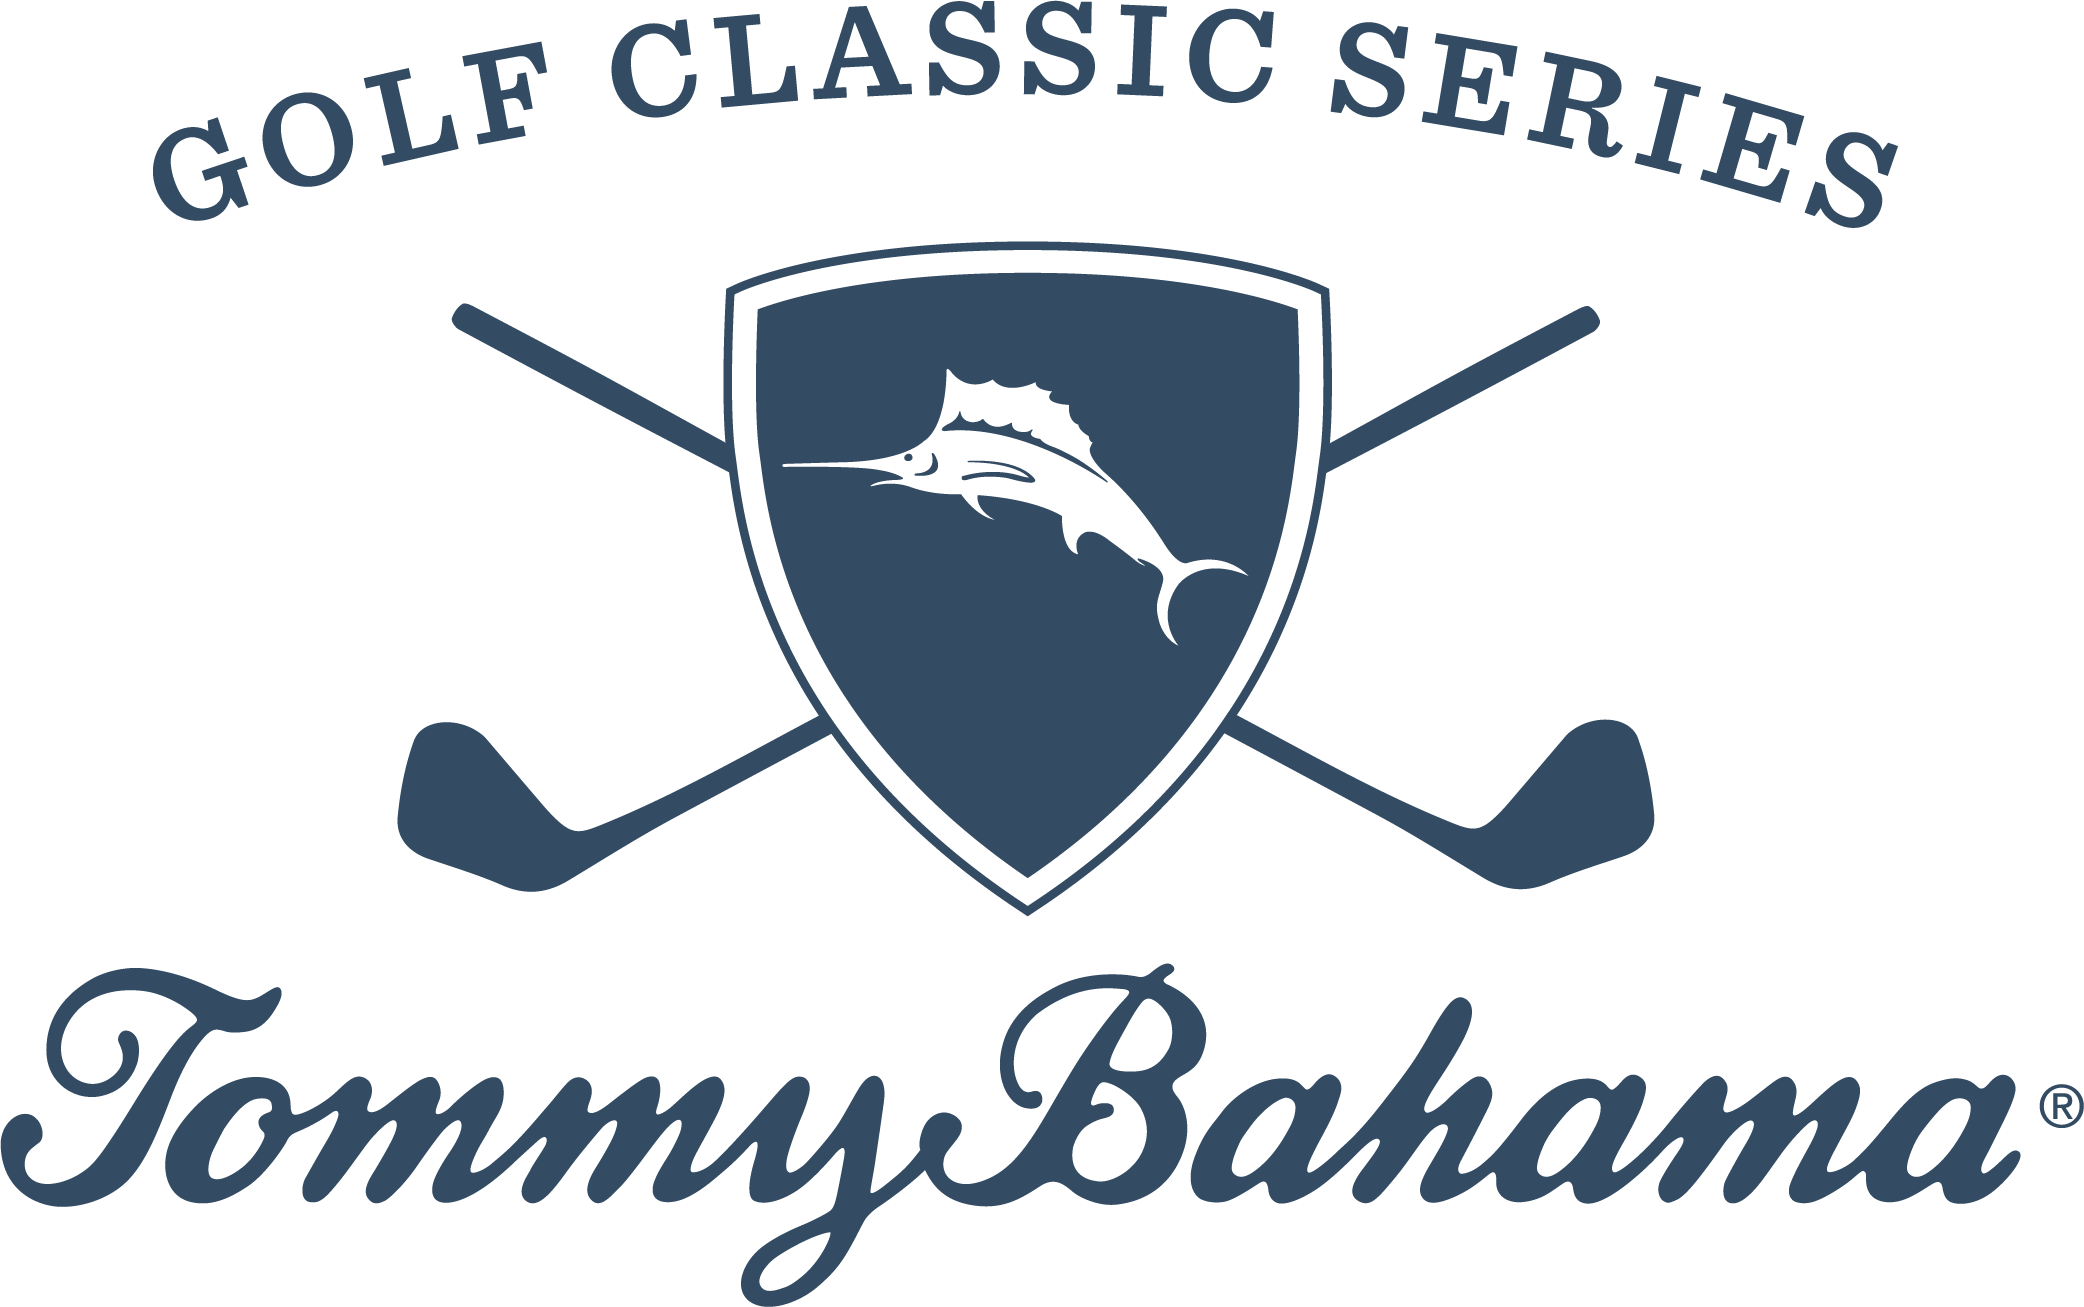 TB_golf classic sereice event logo - blue 2019.png